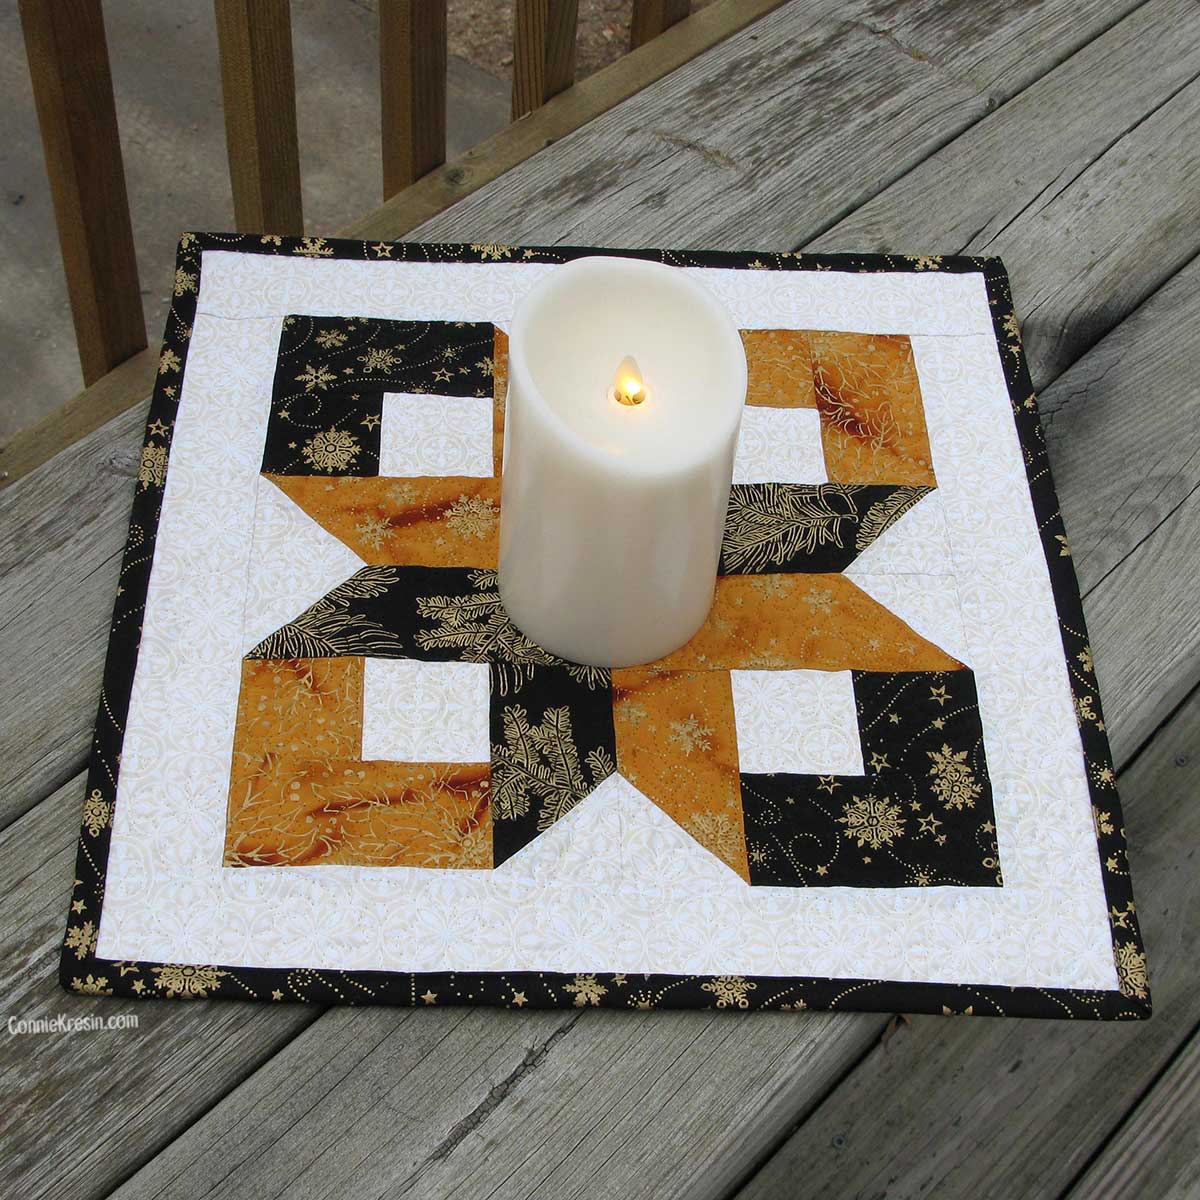 Box Quilt block Silent Night table topper or center piece on deck